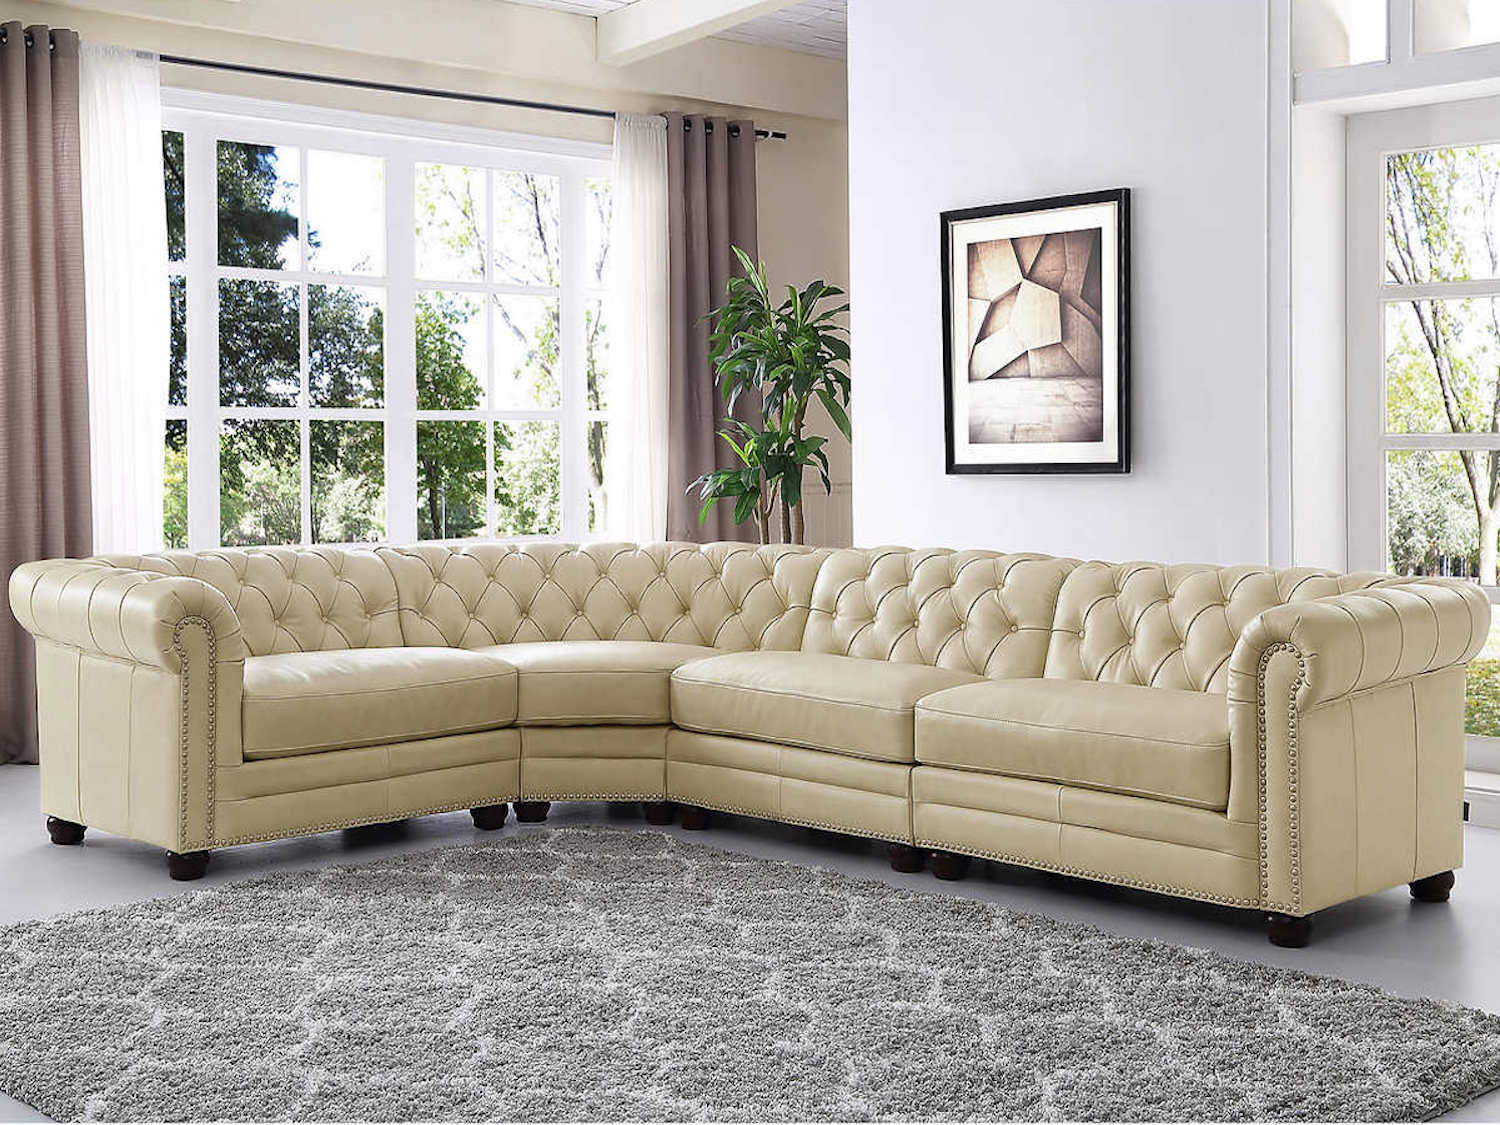 Genuine Leather Kennedy Sectional Sofa